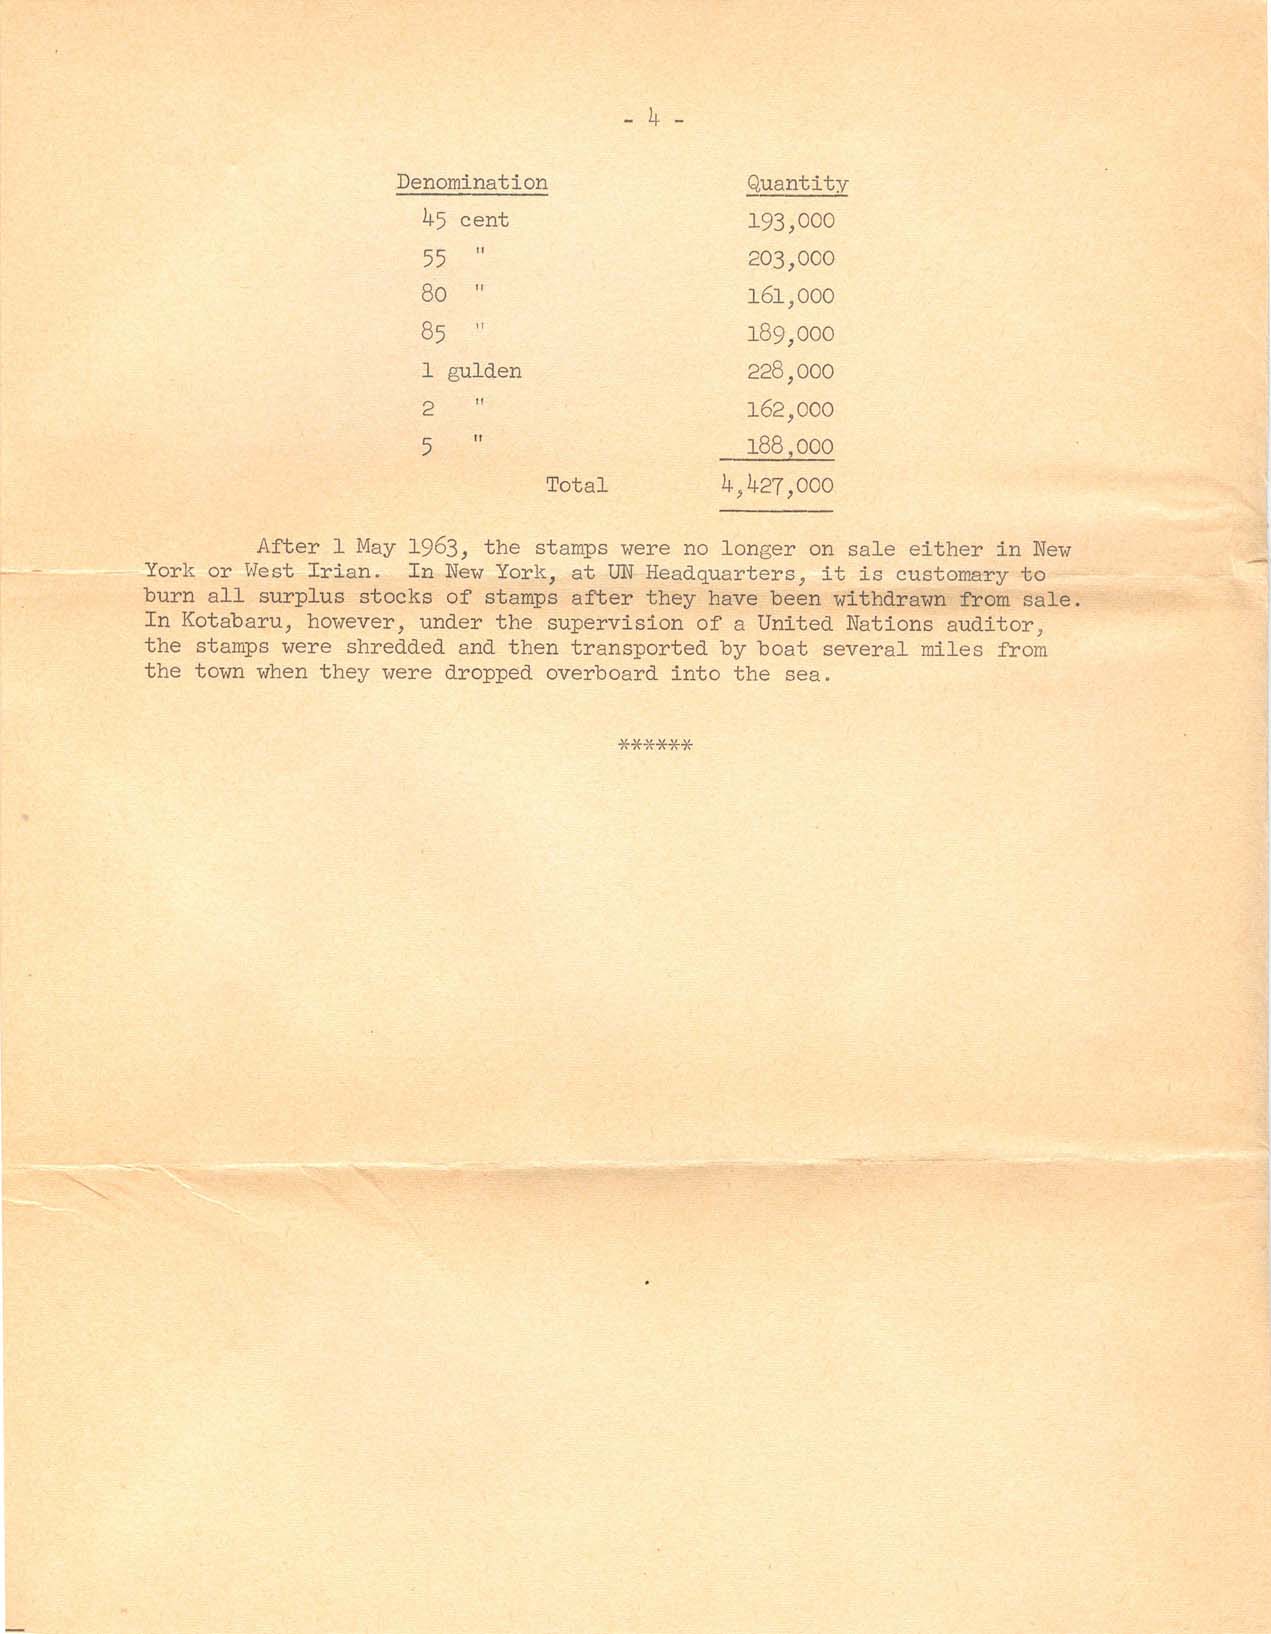 Third Class mail contents - page 4